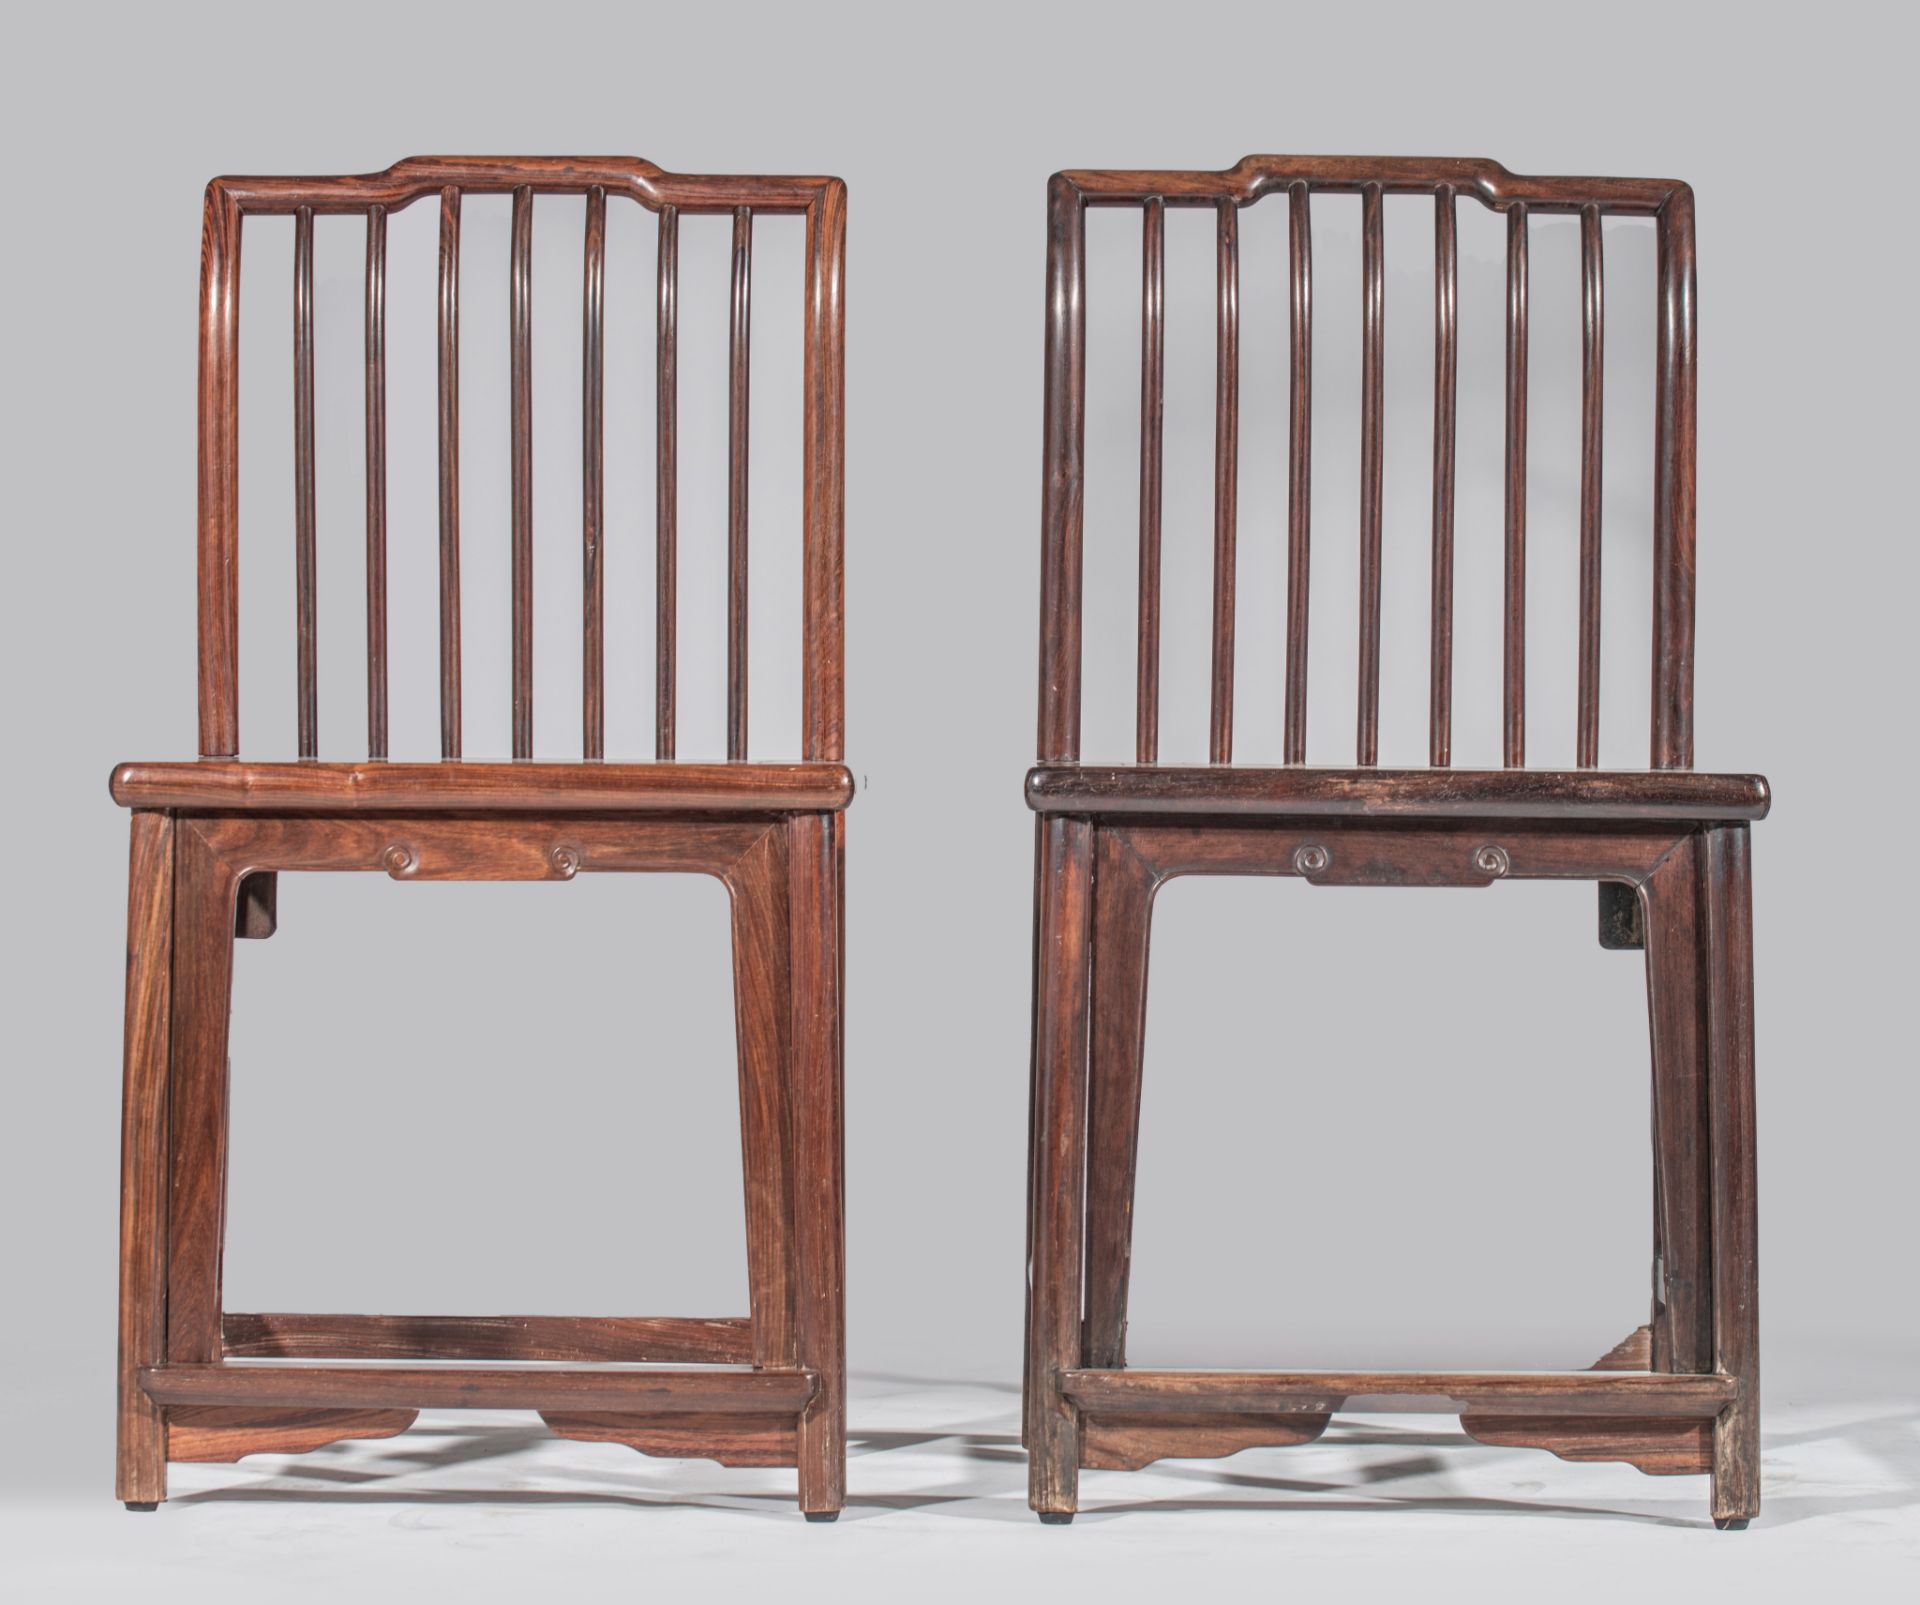 A pair of Chinese hardwood spindle back chairs, Republic period, H 92 - W 52,5 - D 40 cm - Image 3 of 8